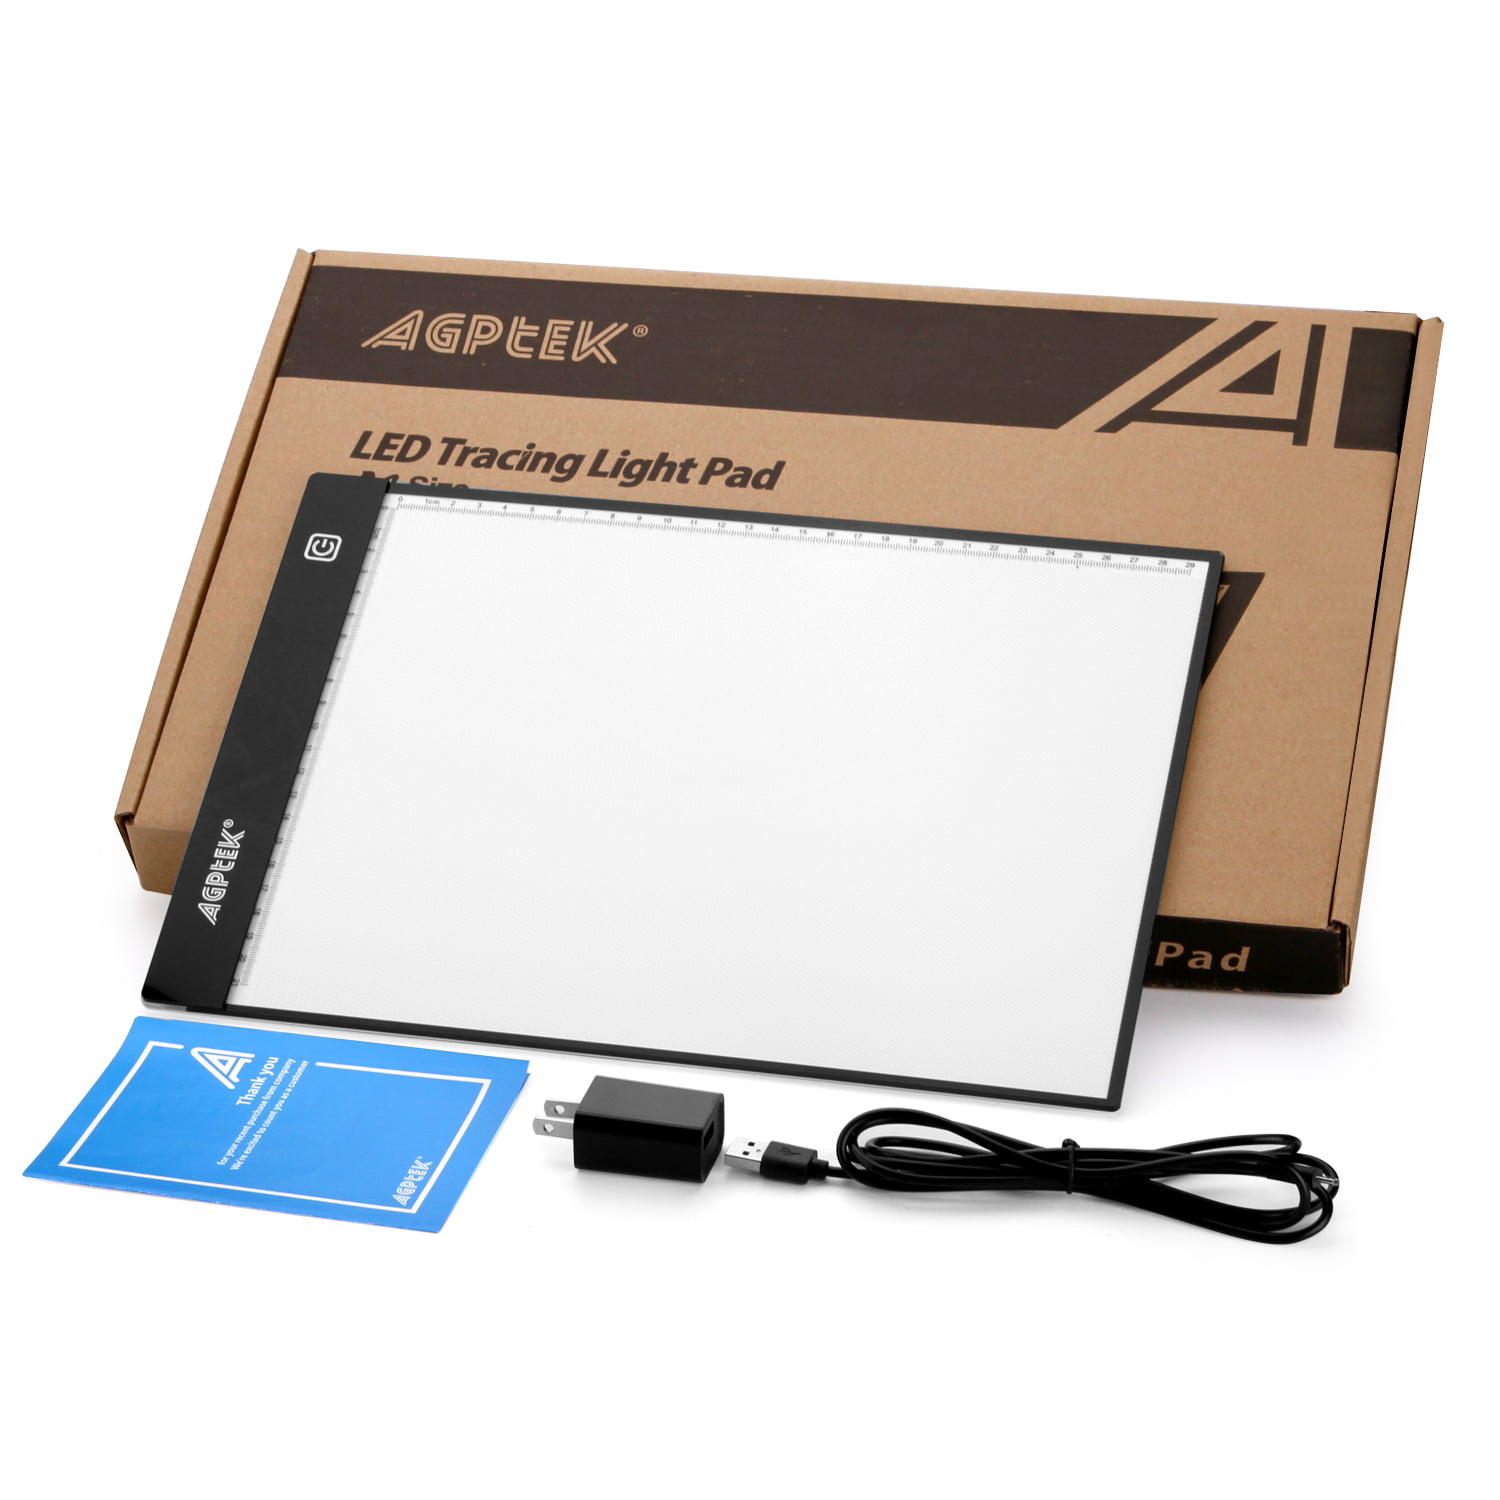 AGPtek A4 Plus LED Light Box Eye Protection Artcraft Tracing Pad USB Powered Dimmable Brightness with Memory Function for Artists Drawing Sketching Animation X-Ray Viewing 